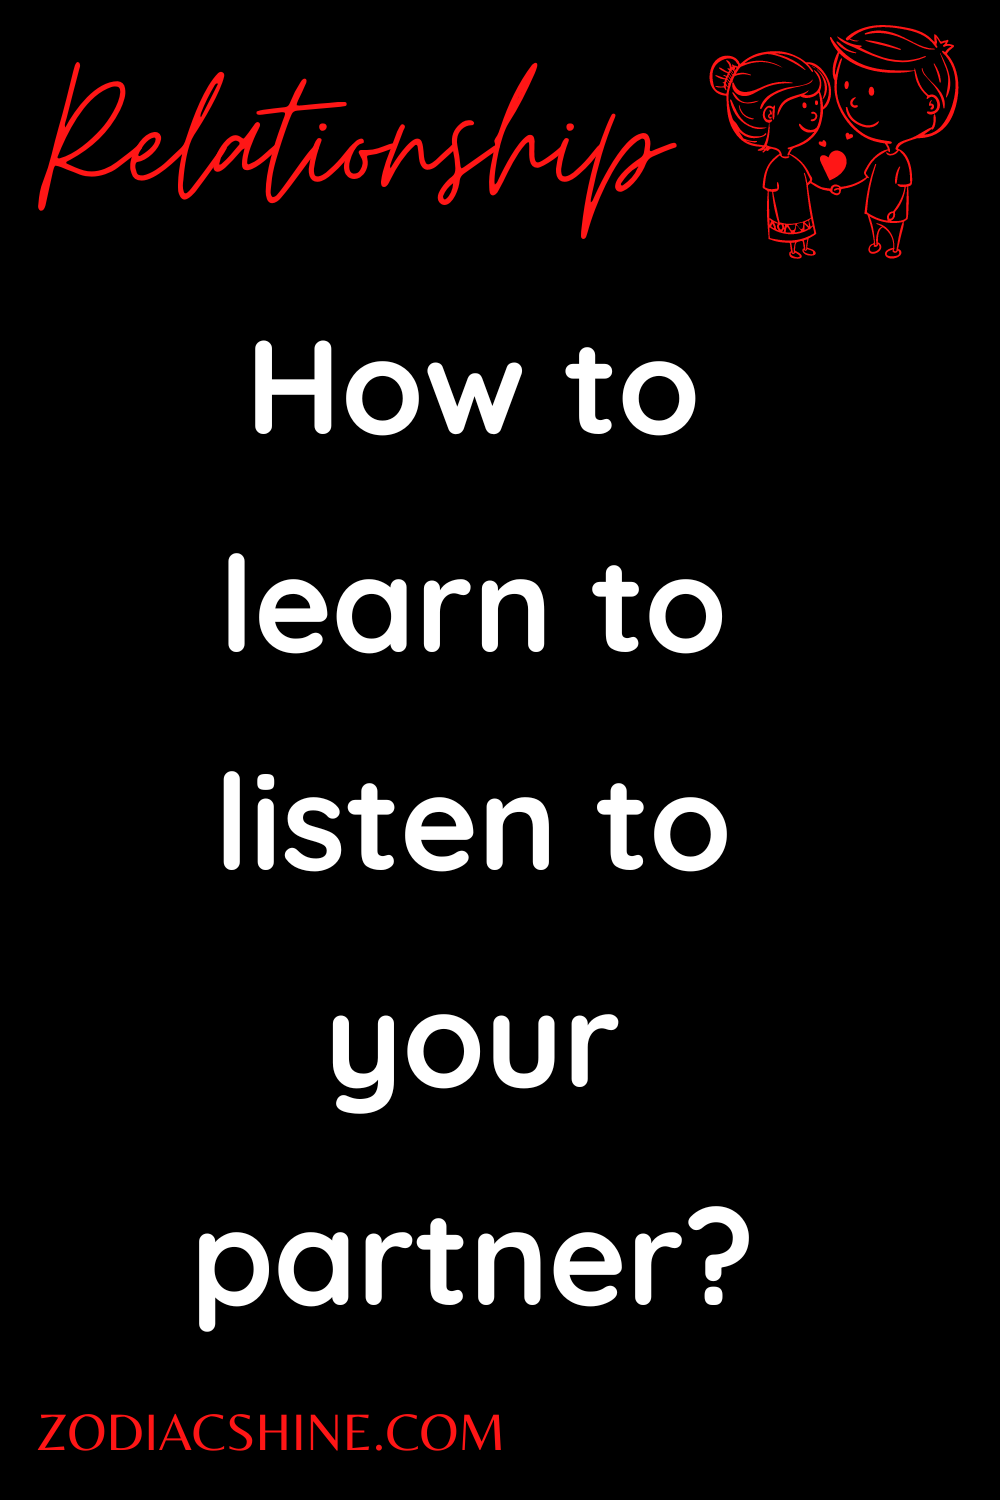 How to learn to listen to your partner?